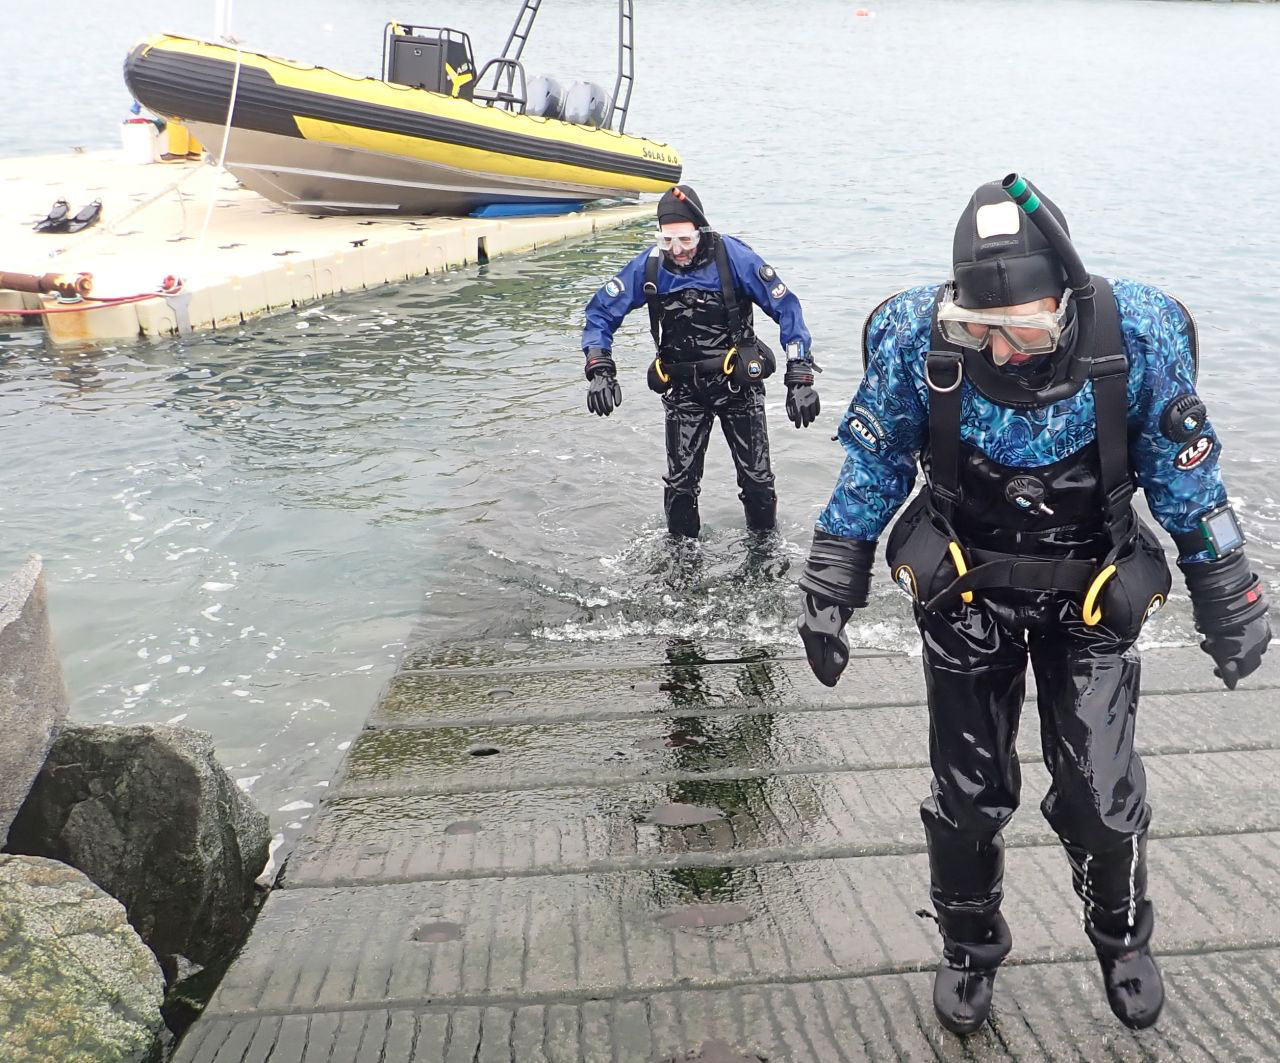 Maggie and Chuck emerging from the water after their dive, walking up a cement dock ramp. 